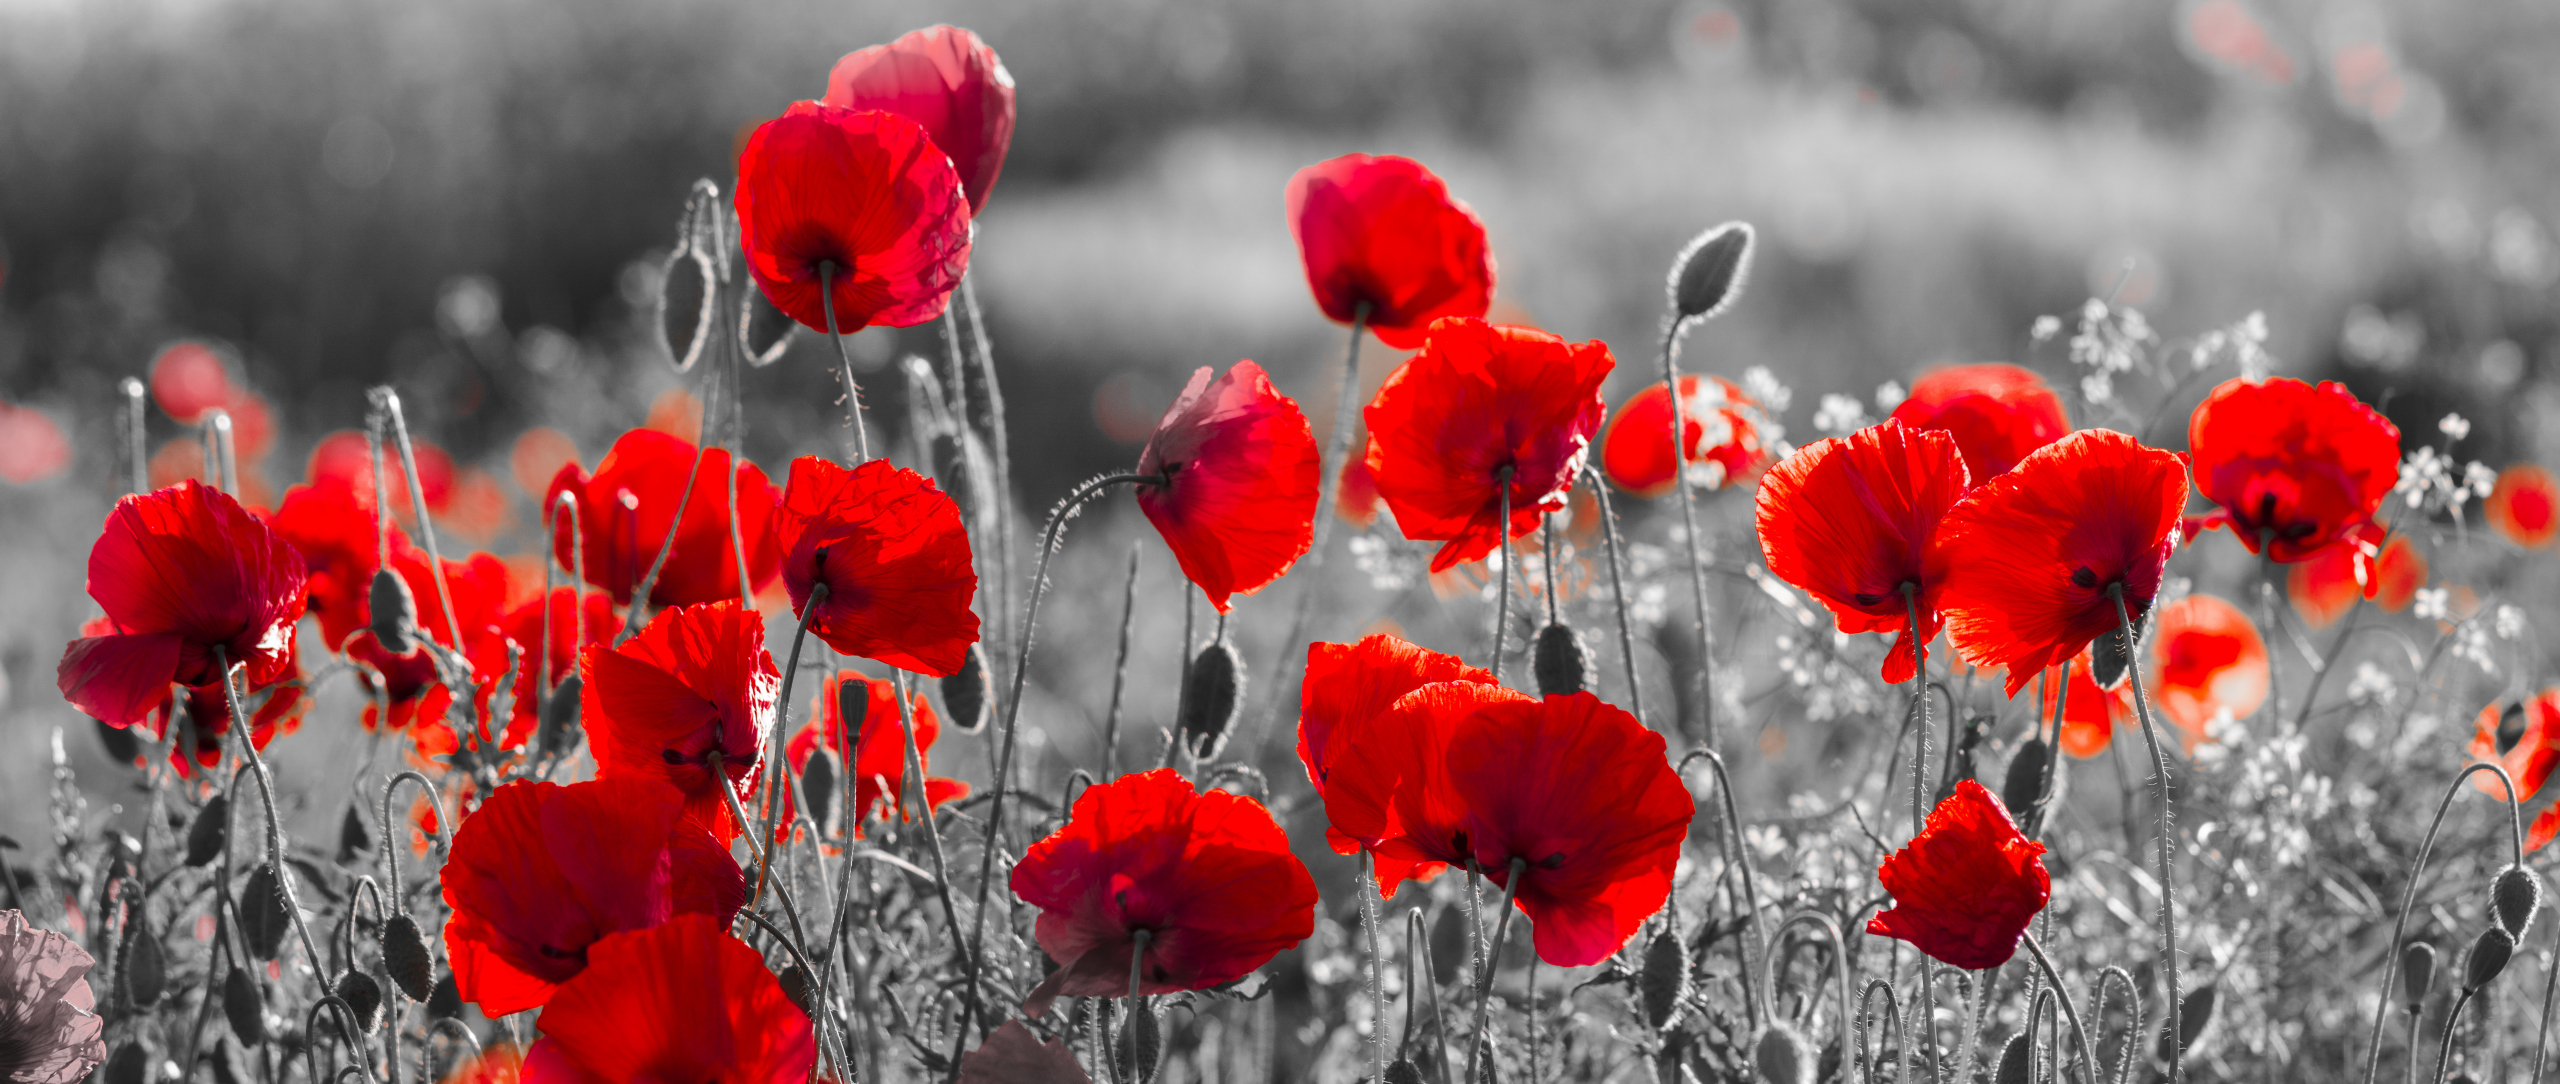 The Poppy Flower : A Memorial Day Remembrance and an Epidemic